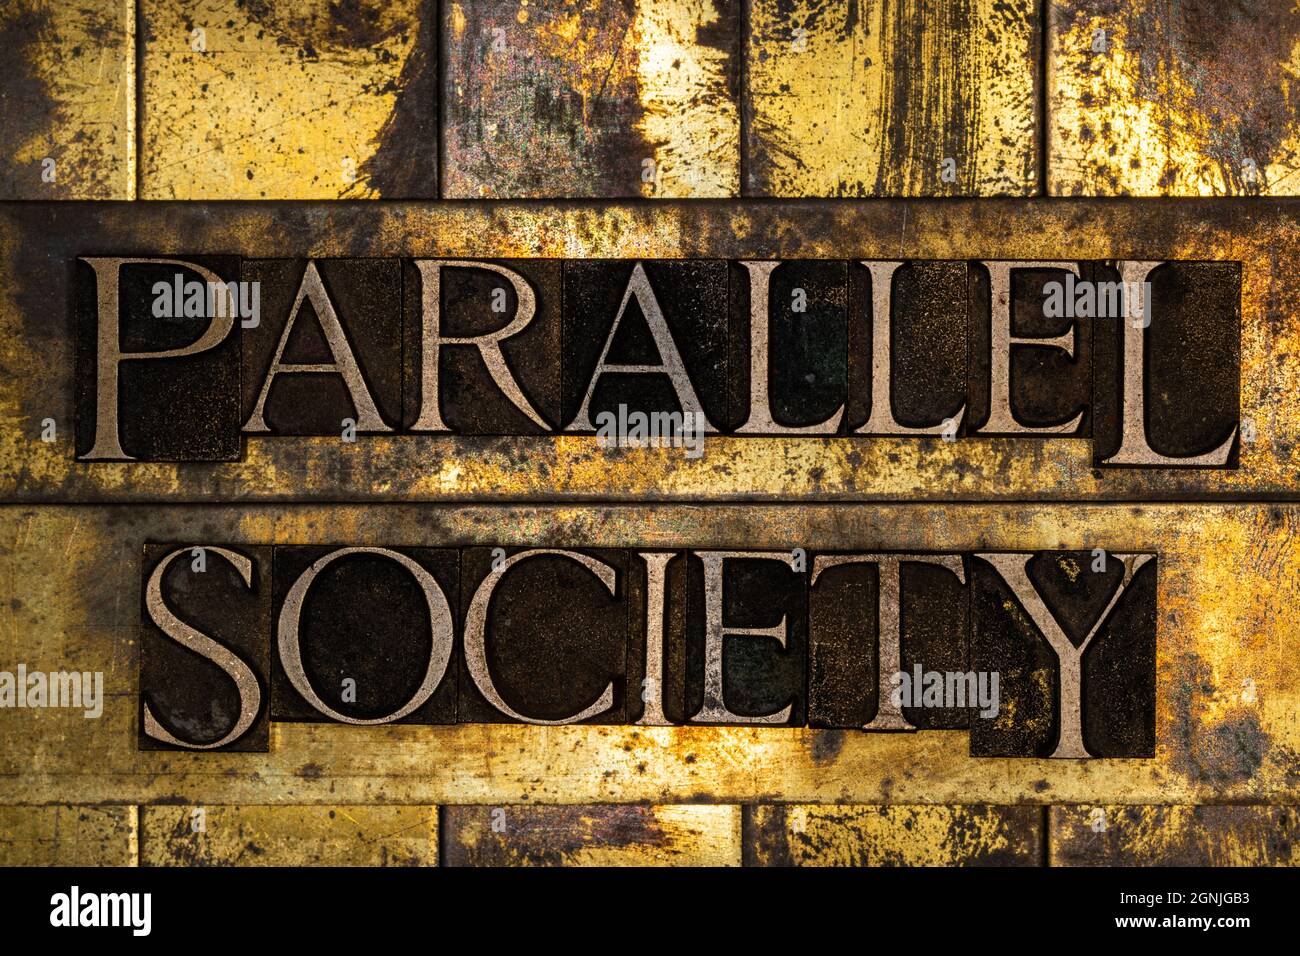 Parallel Society text on textured grunge copper and vintage gold background Stock Photo